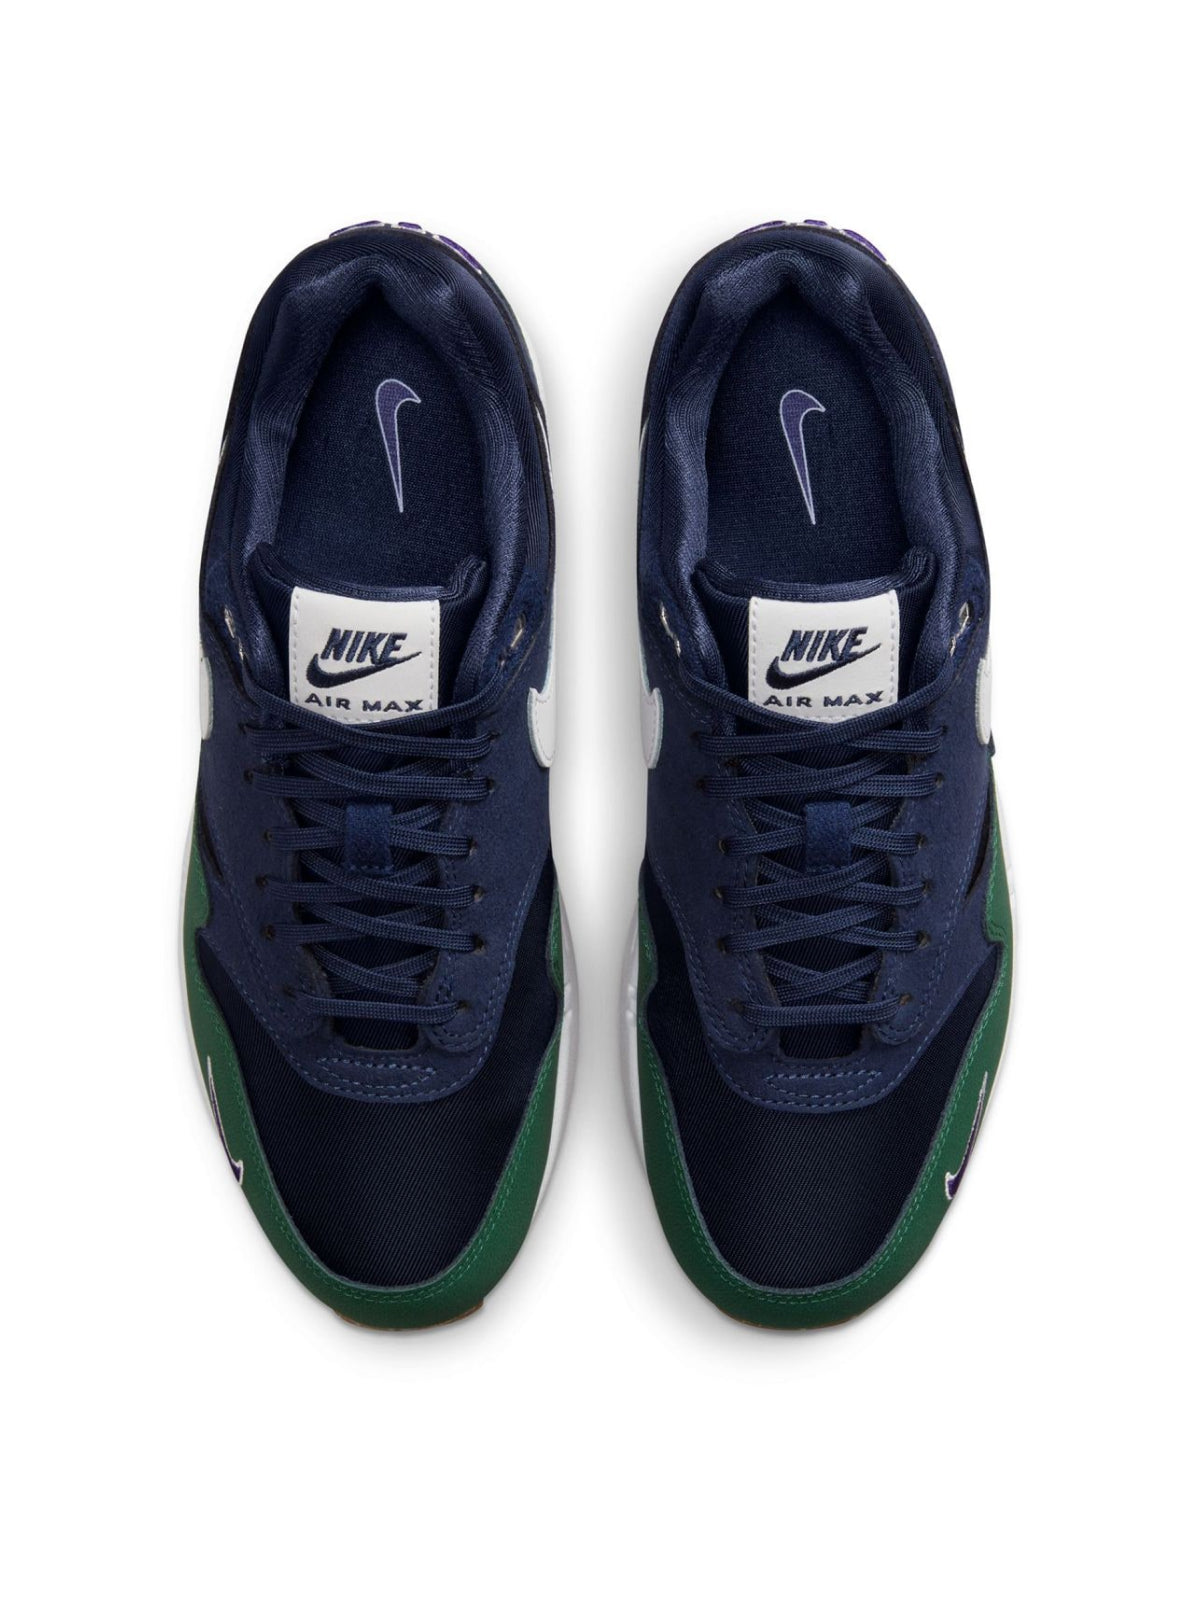 Nike-OUTLET-SALE-Air Max 1 '87 QS Sneakers-ARCHIVIST